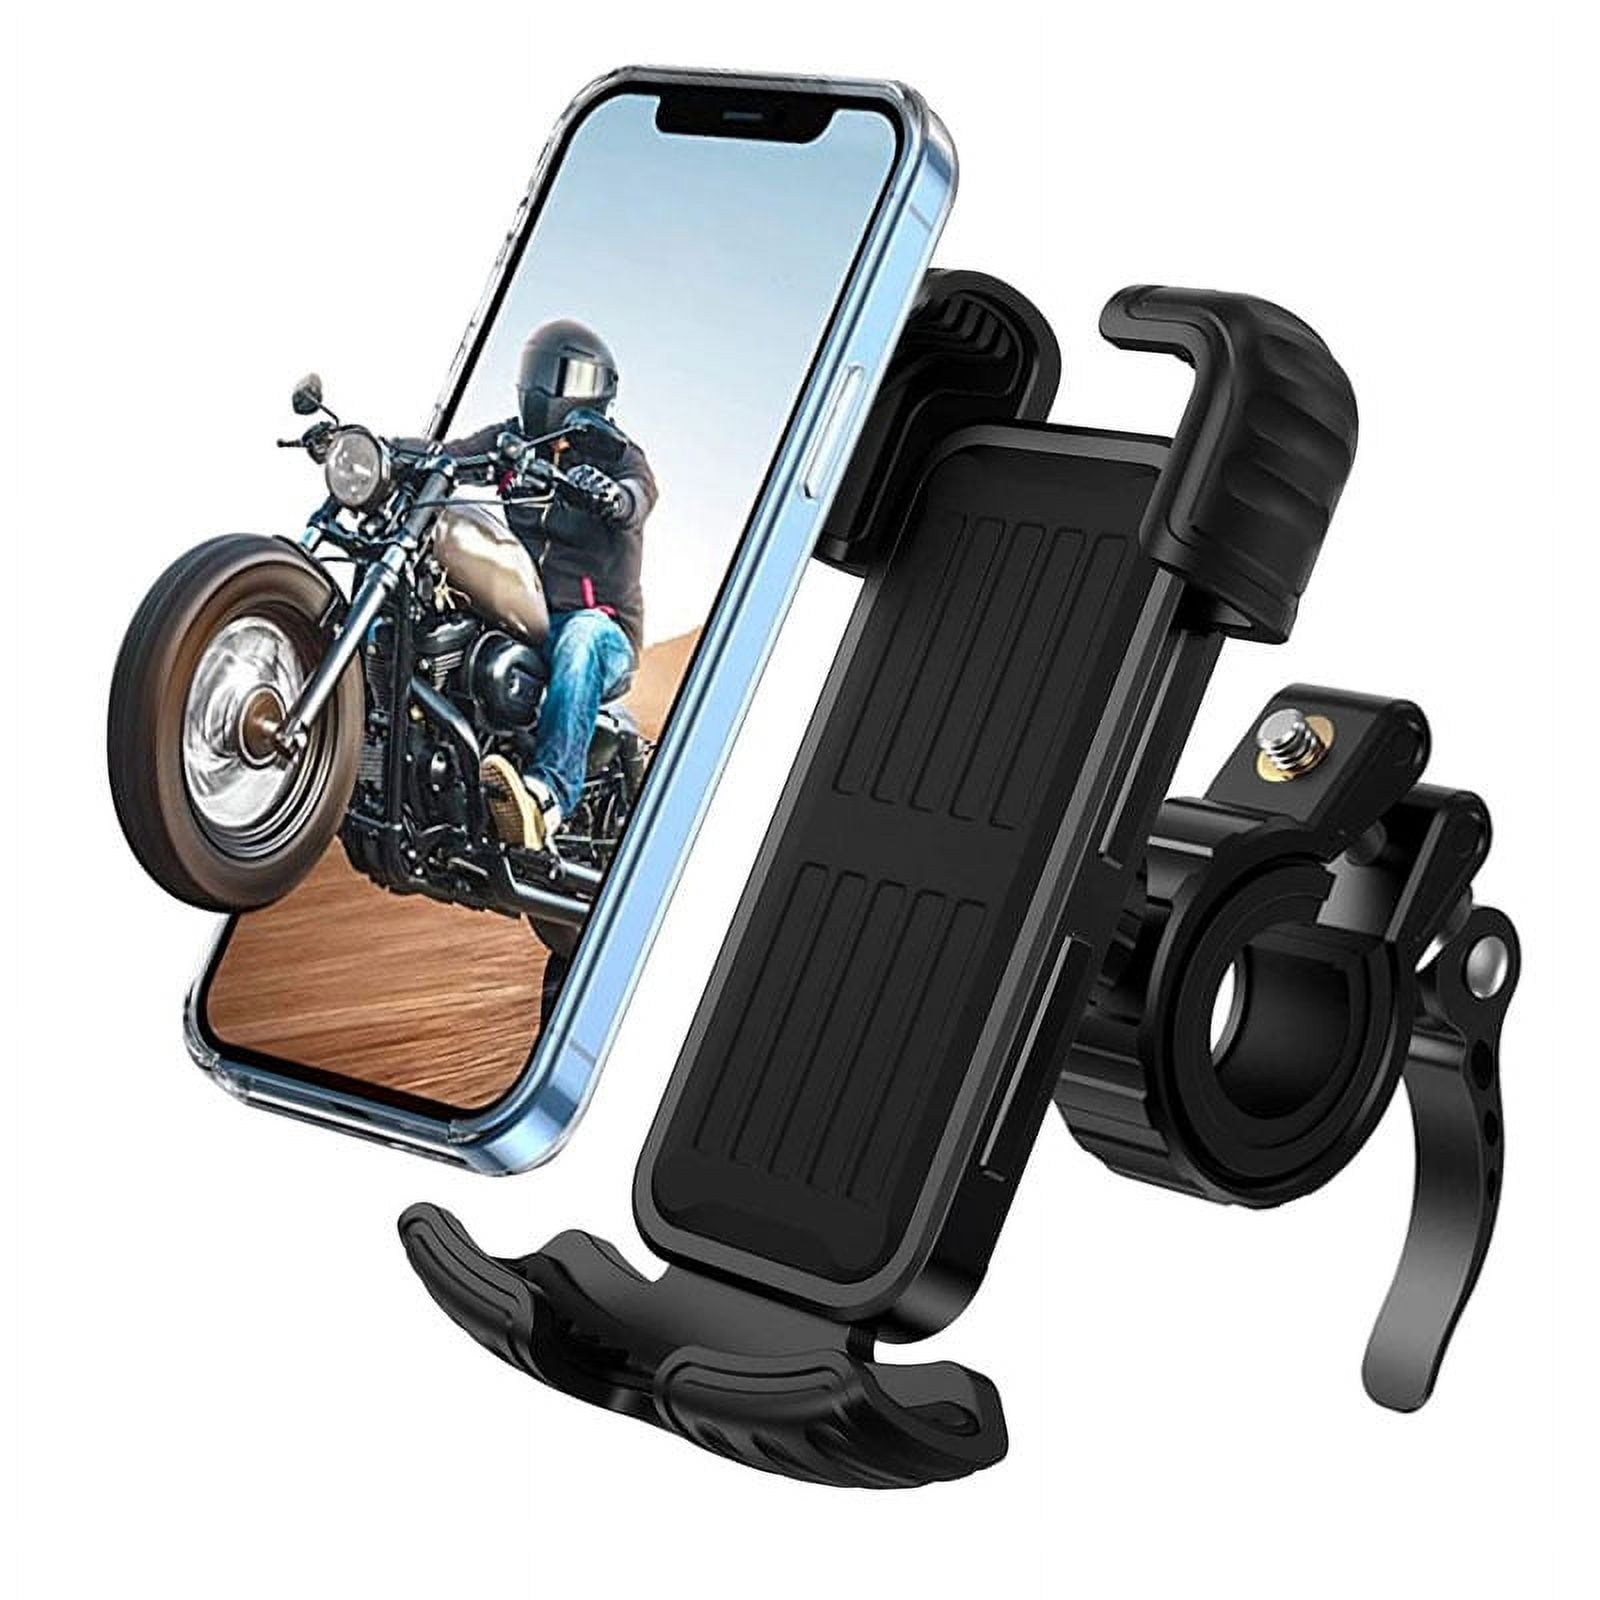 IC ICLOVER Bicycle Phone Holder Mount, Adjustable Handlebar of Motorcycle  Phone Mount for Electric, Mountain, Scooter, and Dirt Bikes, 360 Degrees  Rotation for iPhone and More 3.5-6.8 inch Cell Phone 